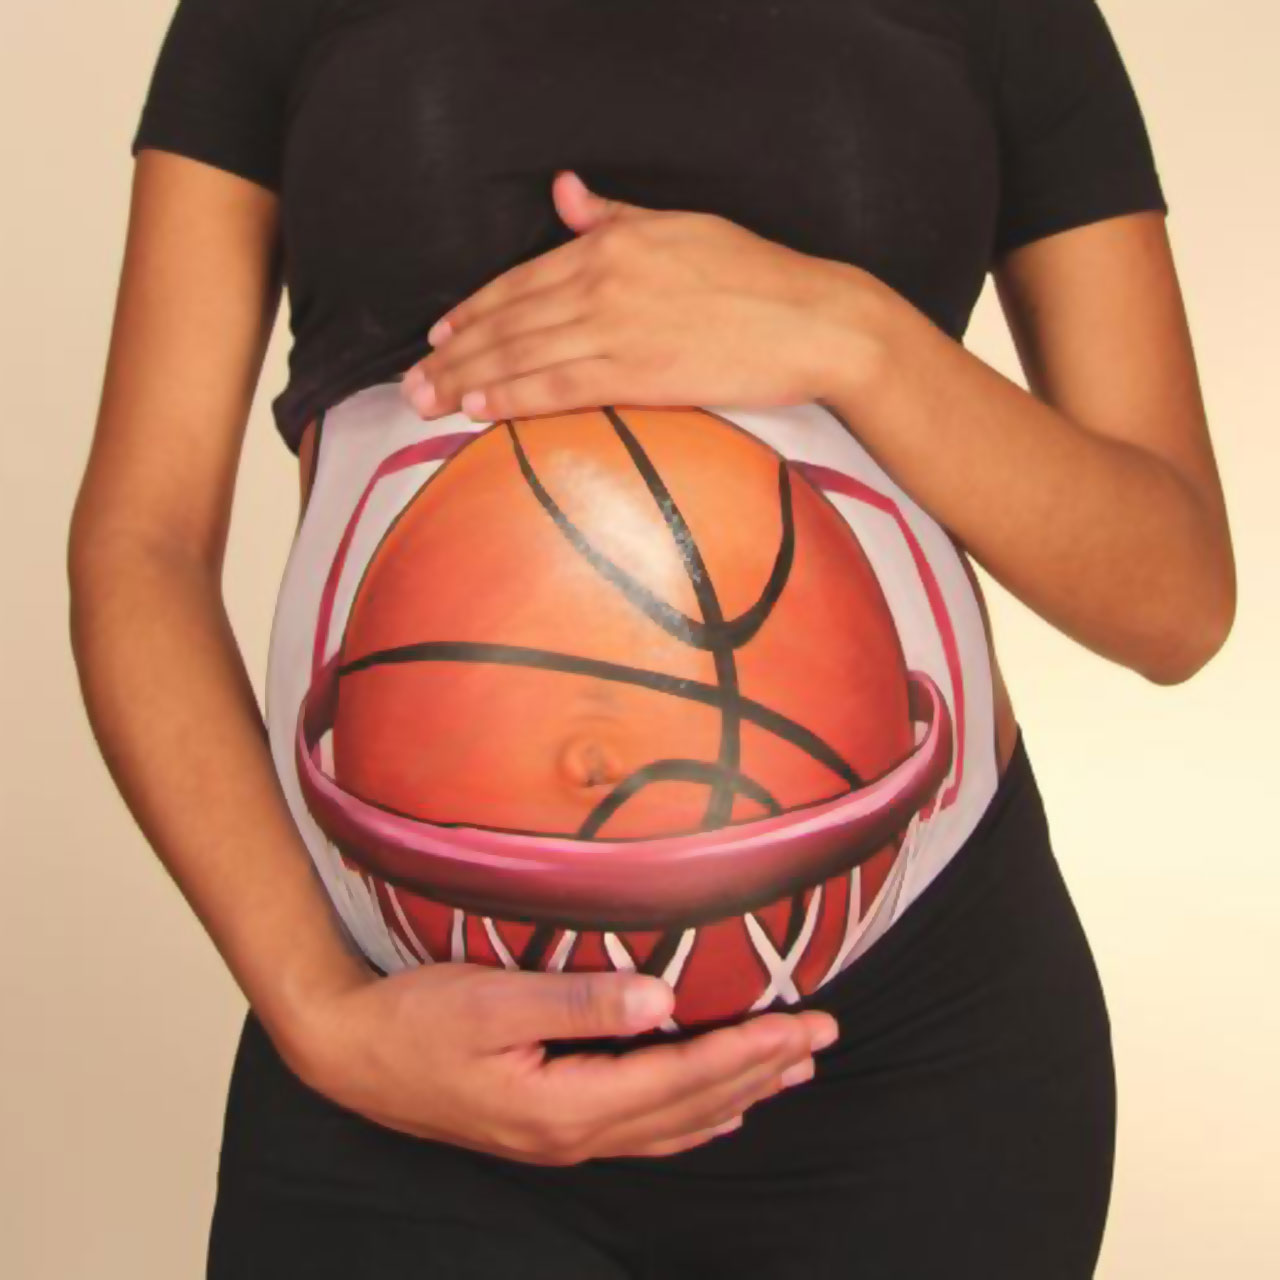 Ayesha Curry can hit a three-pointer even in her ninth month of pregnancy